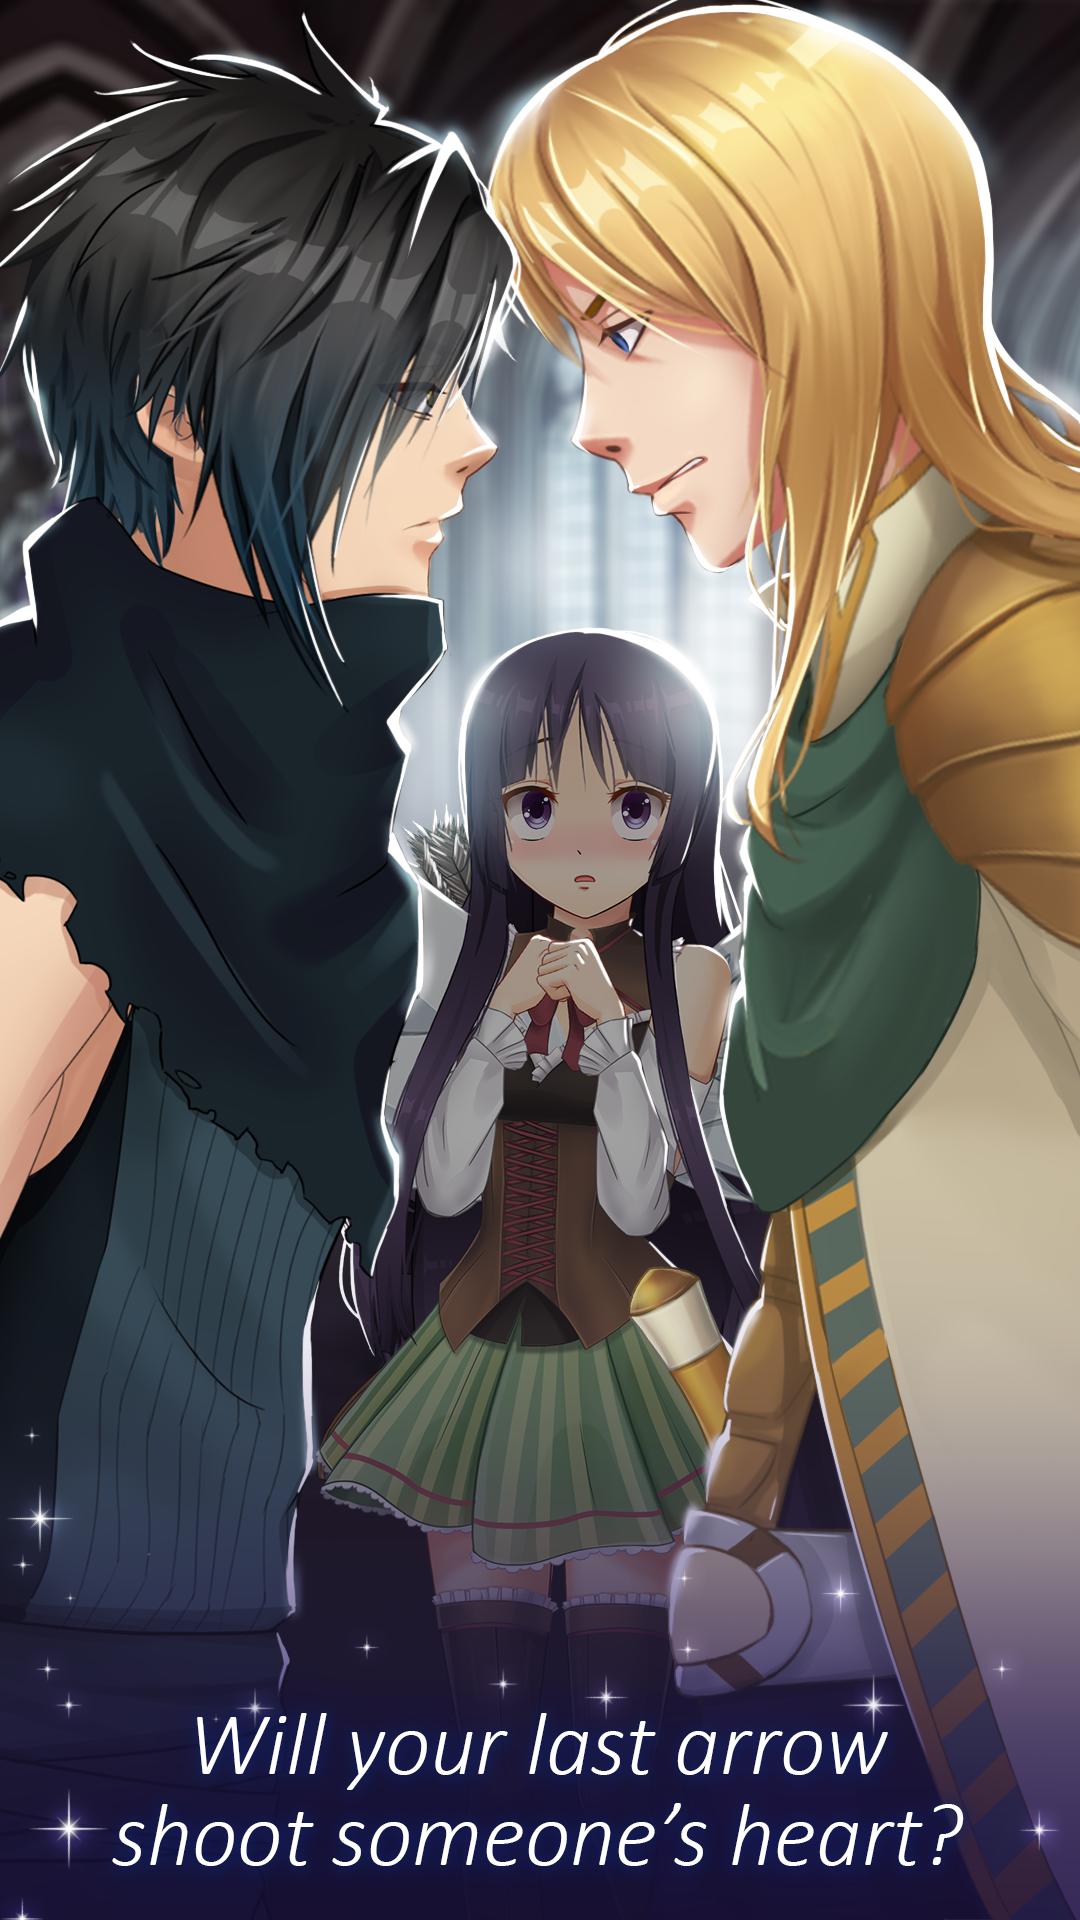 Anime Love Story Games Online Free - Otome Game: Love Dating Story for